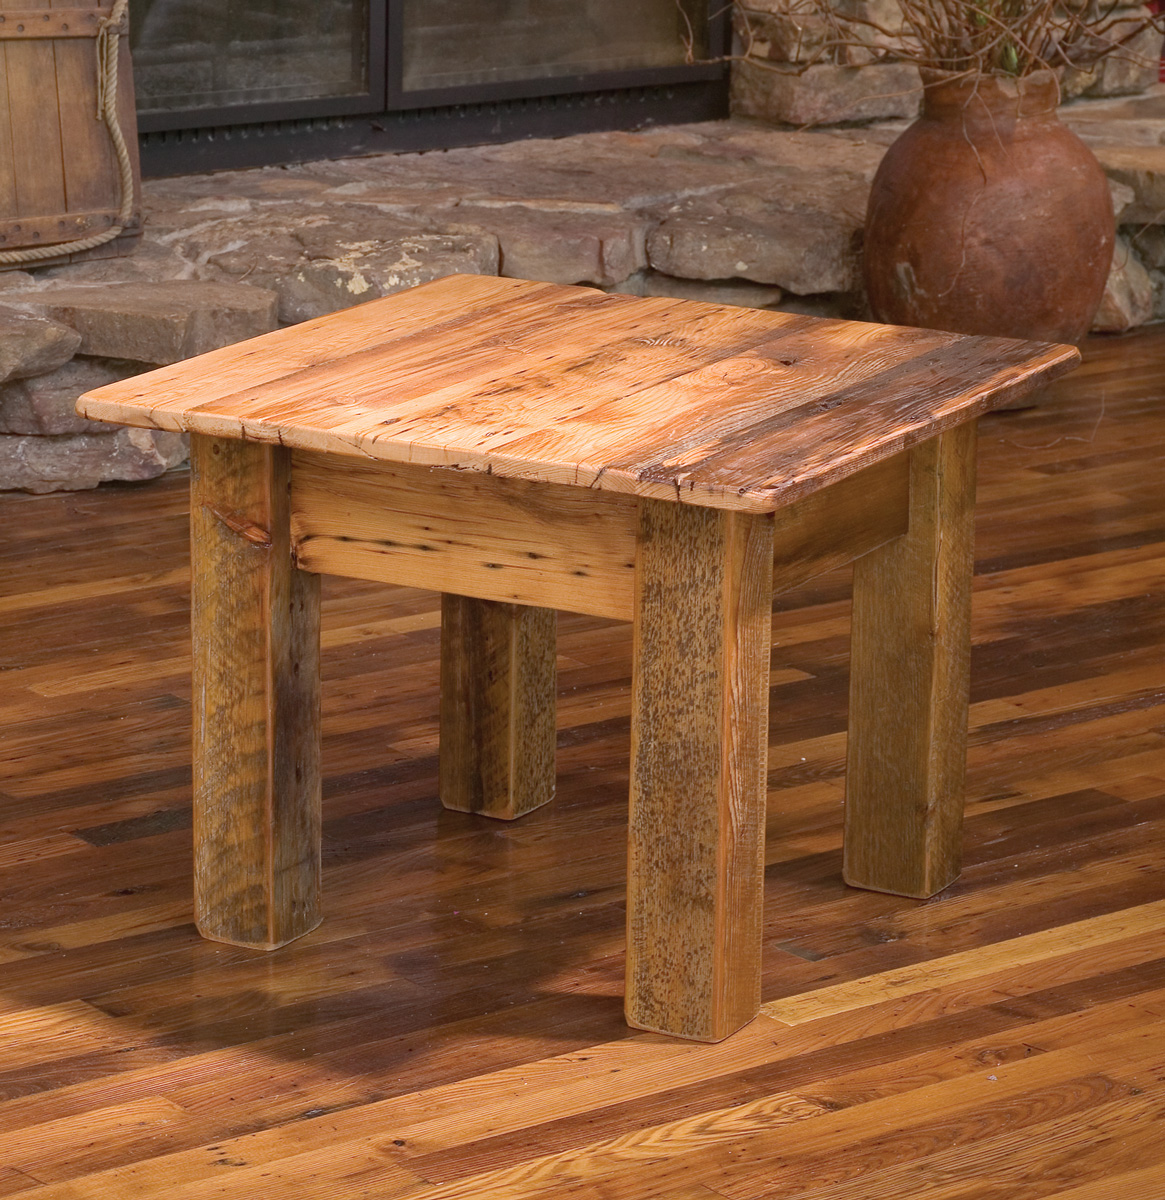 rustic end tables for coma frique studio breathtaking fresh pine unique table sal ashley furniture accents chair side tabl tall thin lap tray teak retail display cases entryway